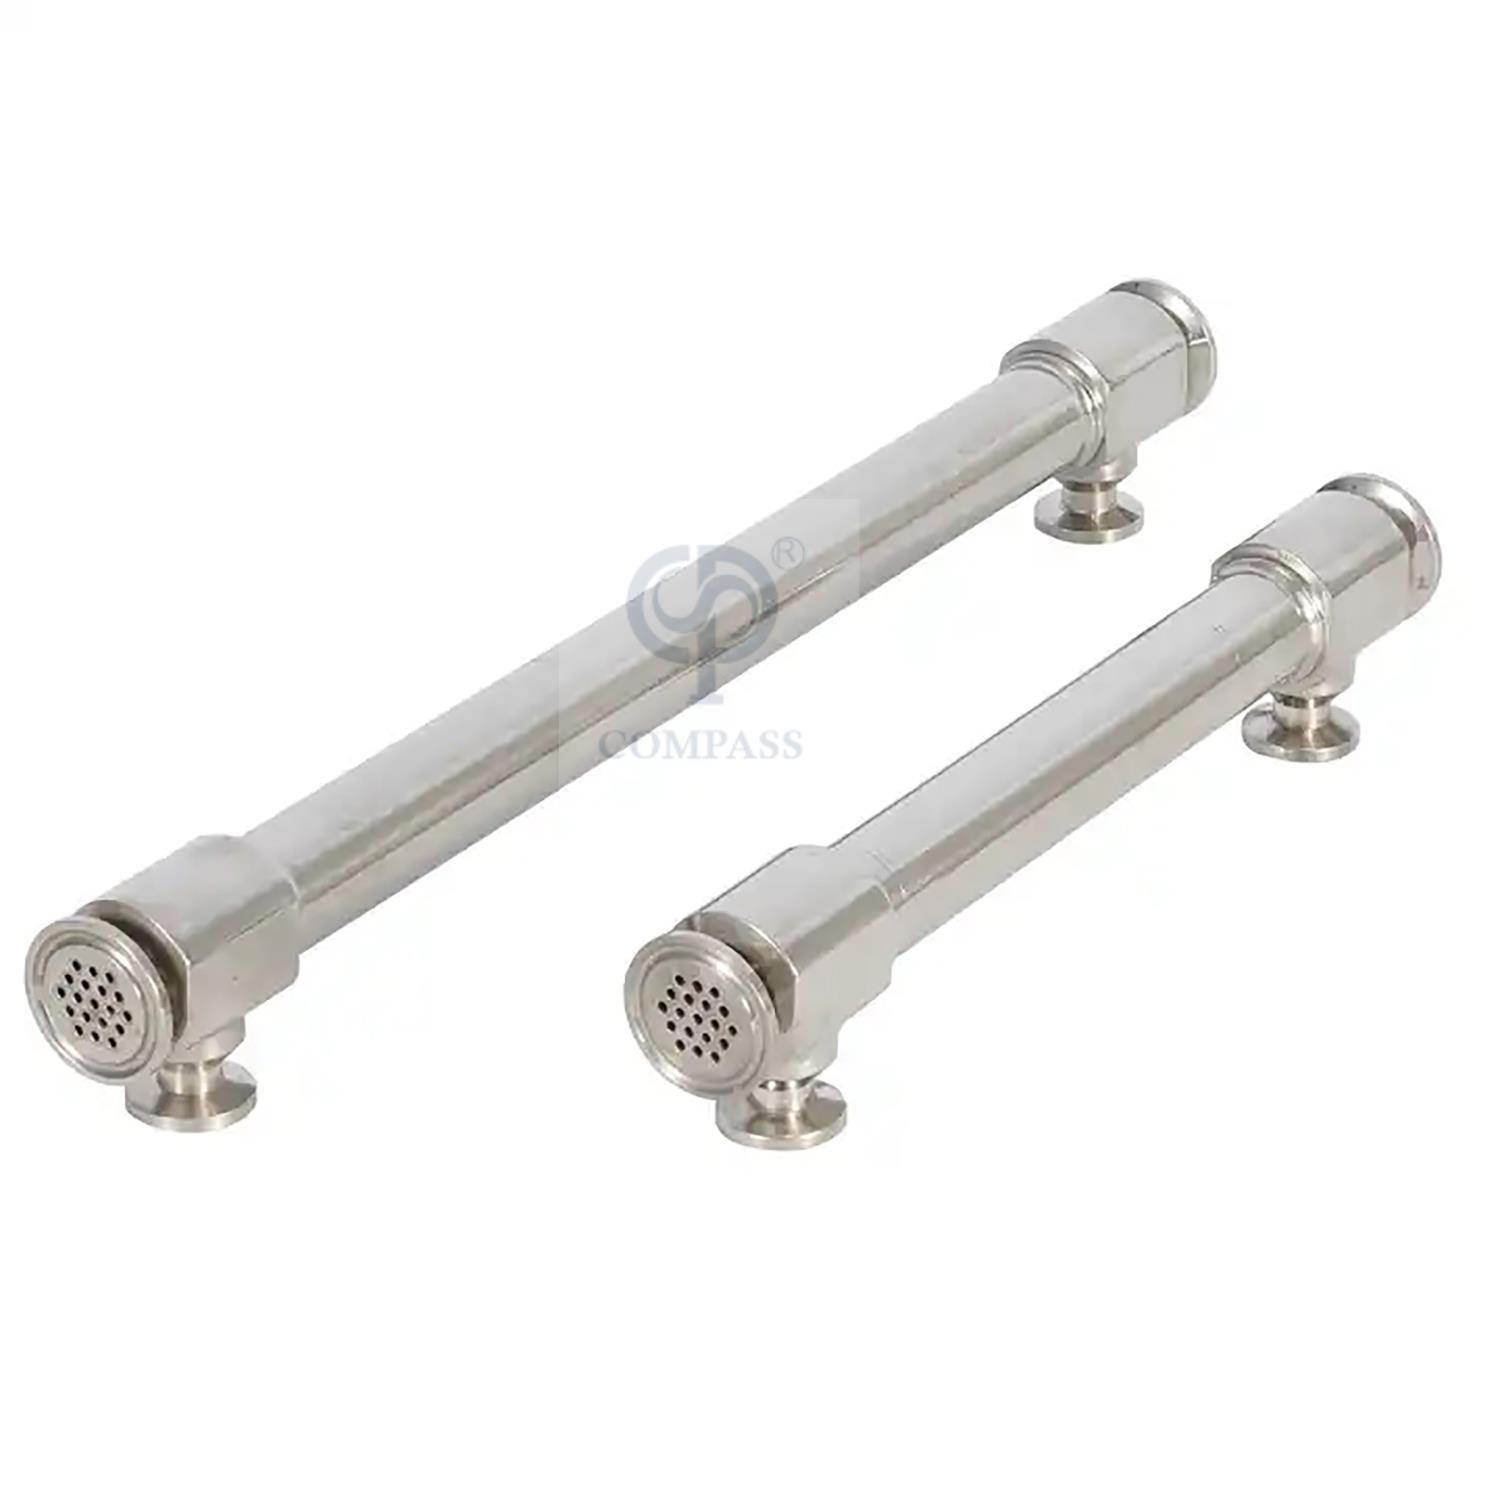 SS316L and SS304 Stainless Steel Shell Side Thread or Single Pass Double Tube Heat Exchanger